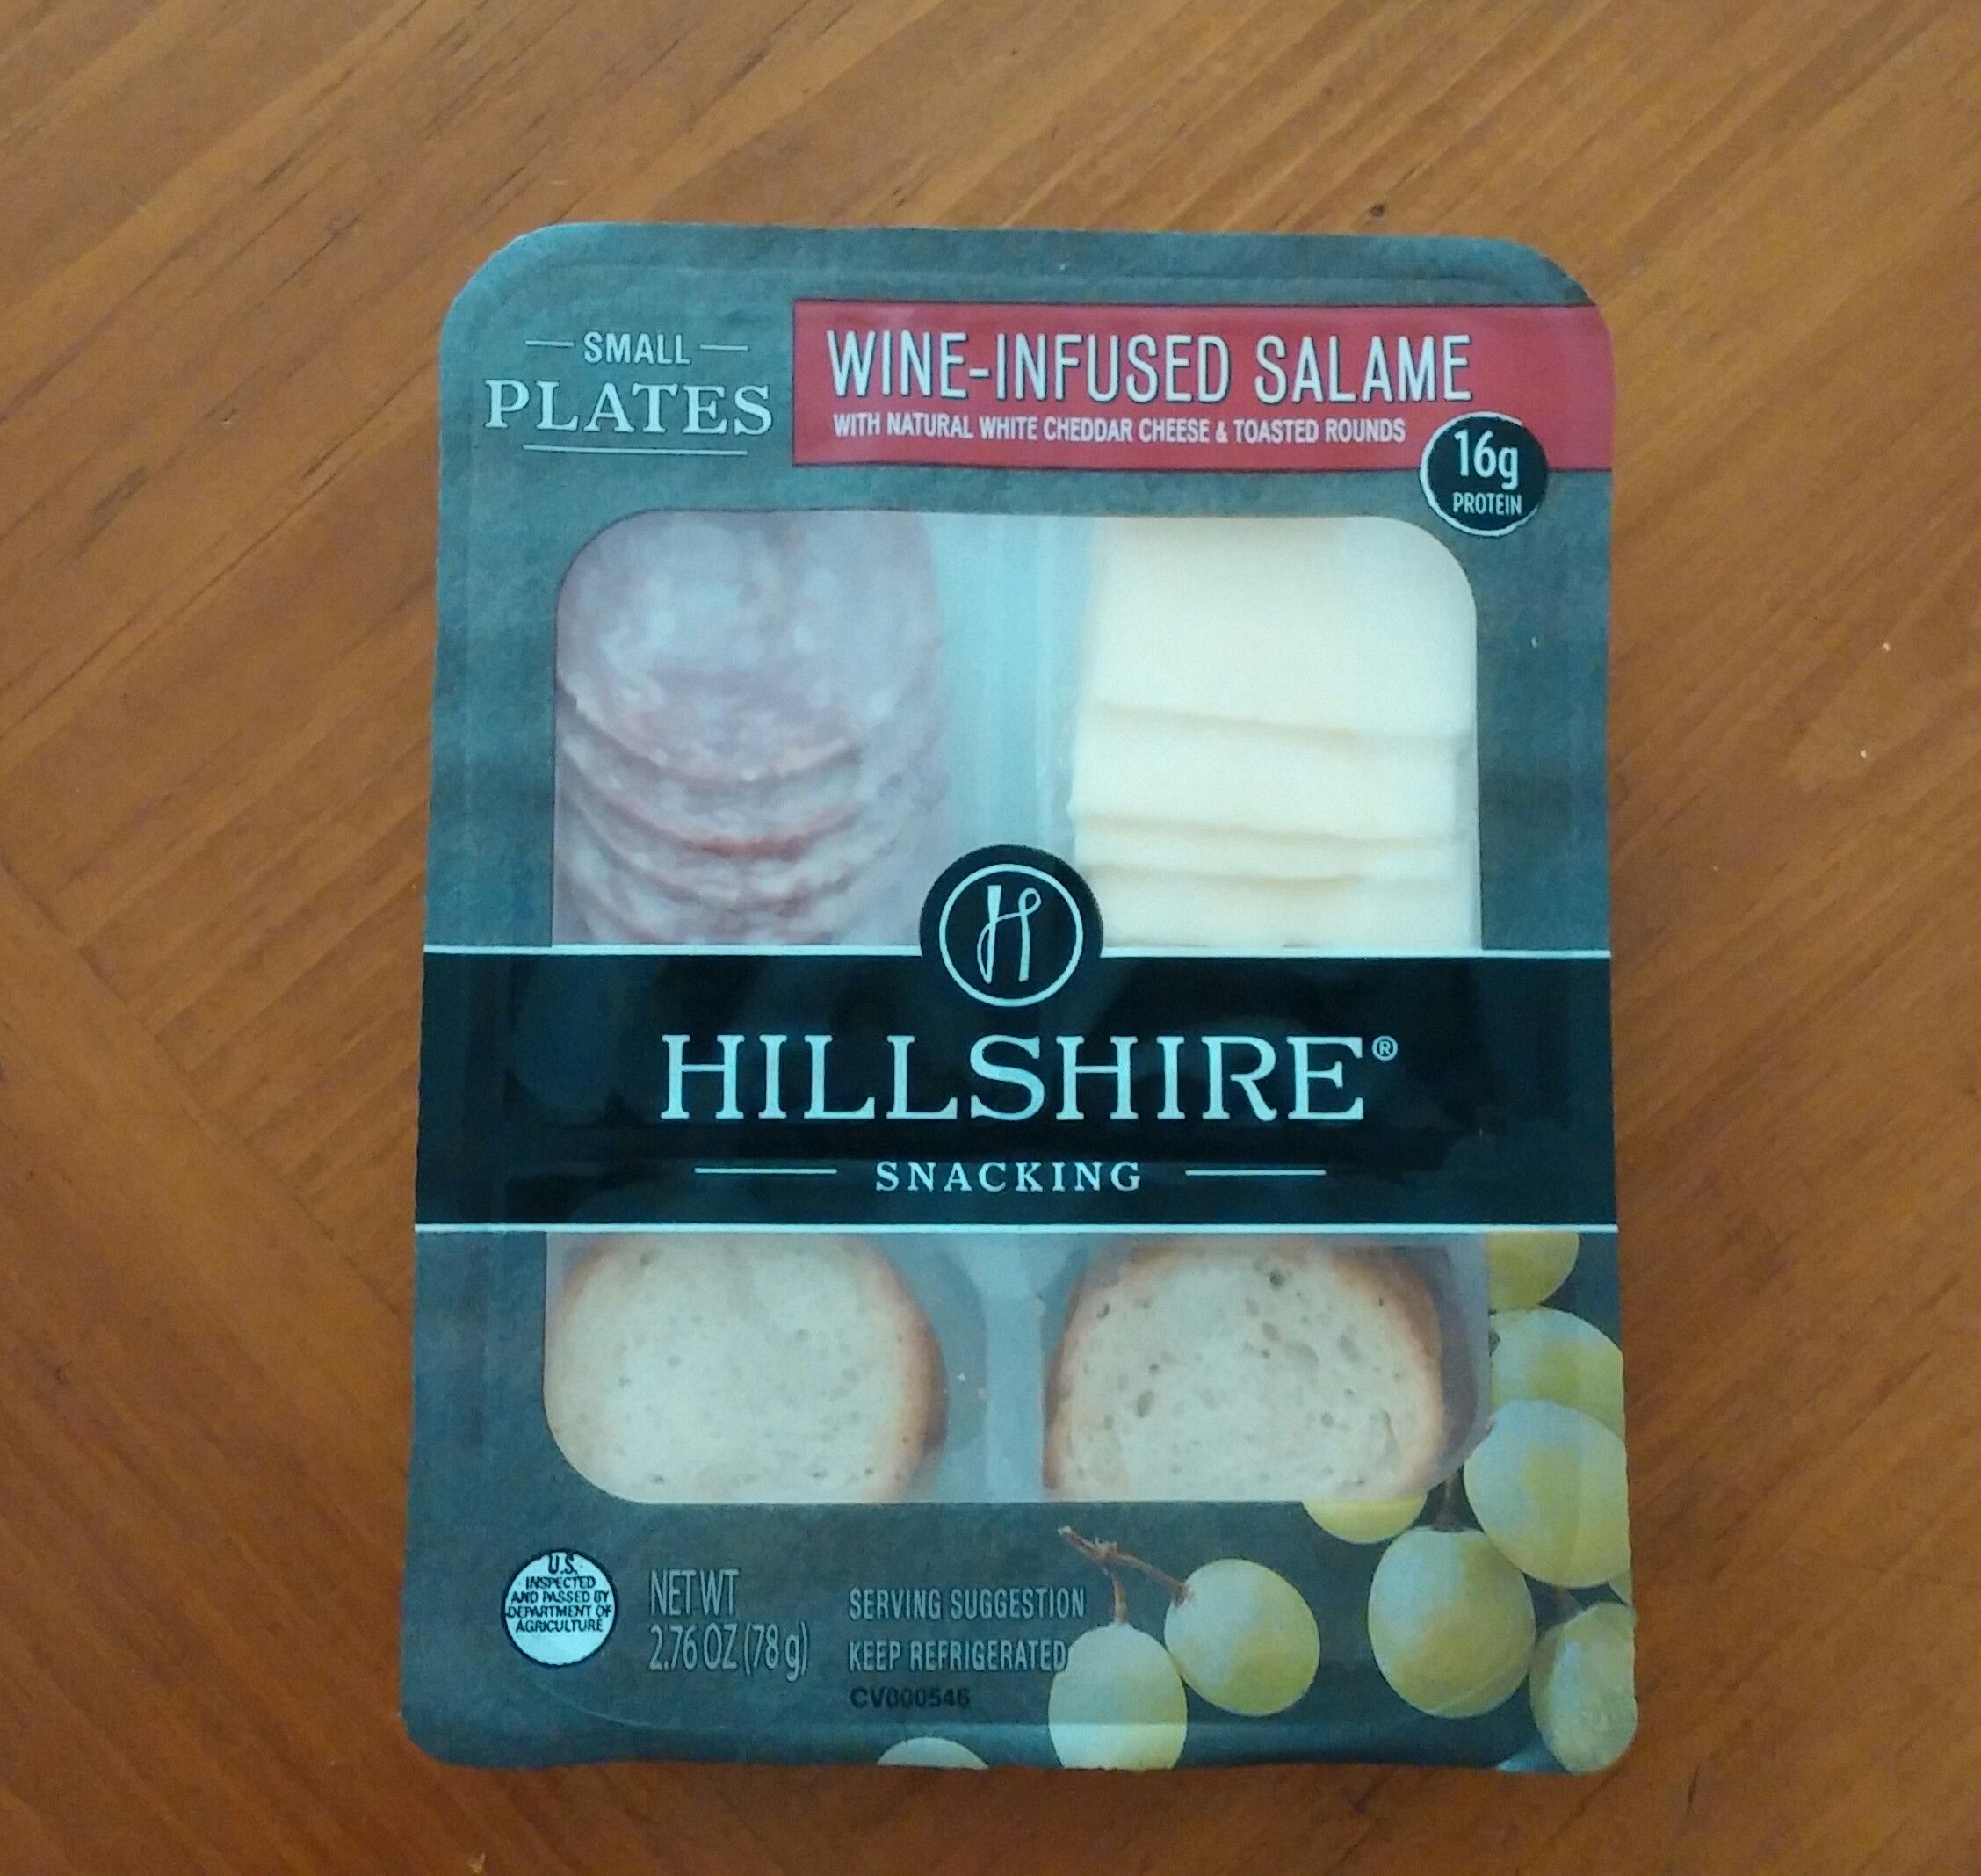 Lunchables for the discerning young professional.